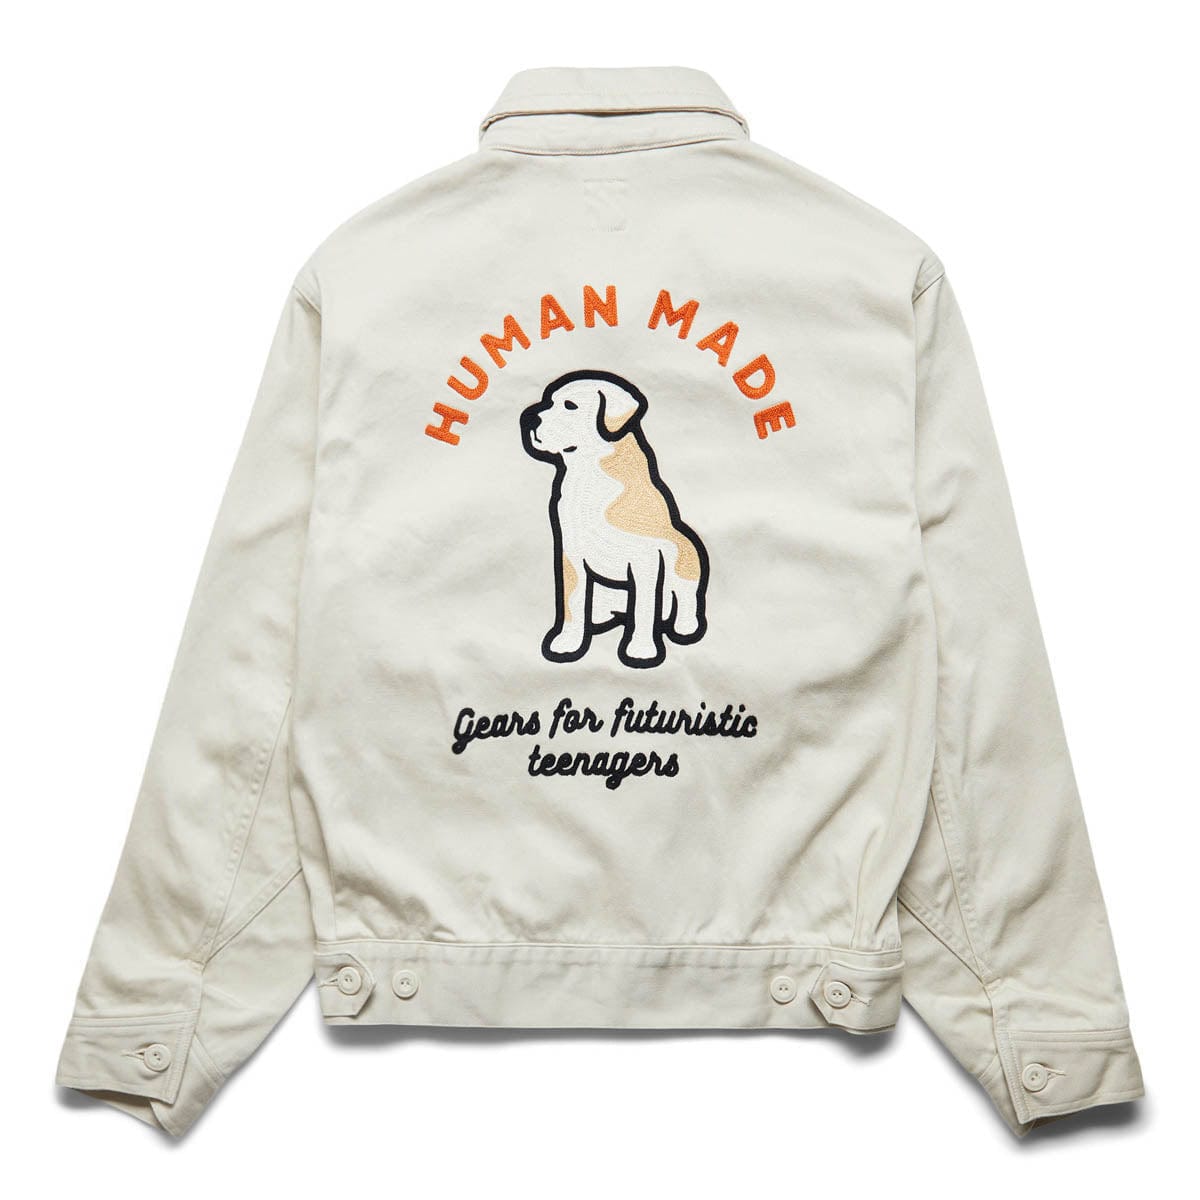 HUMAN MADE 2019 CRAZY WORK JACKET 777104 From Japan Check Images Size L  Mint